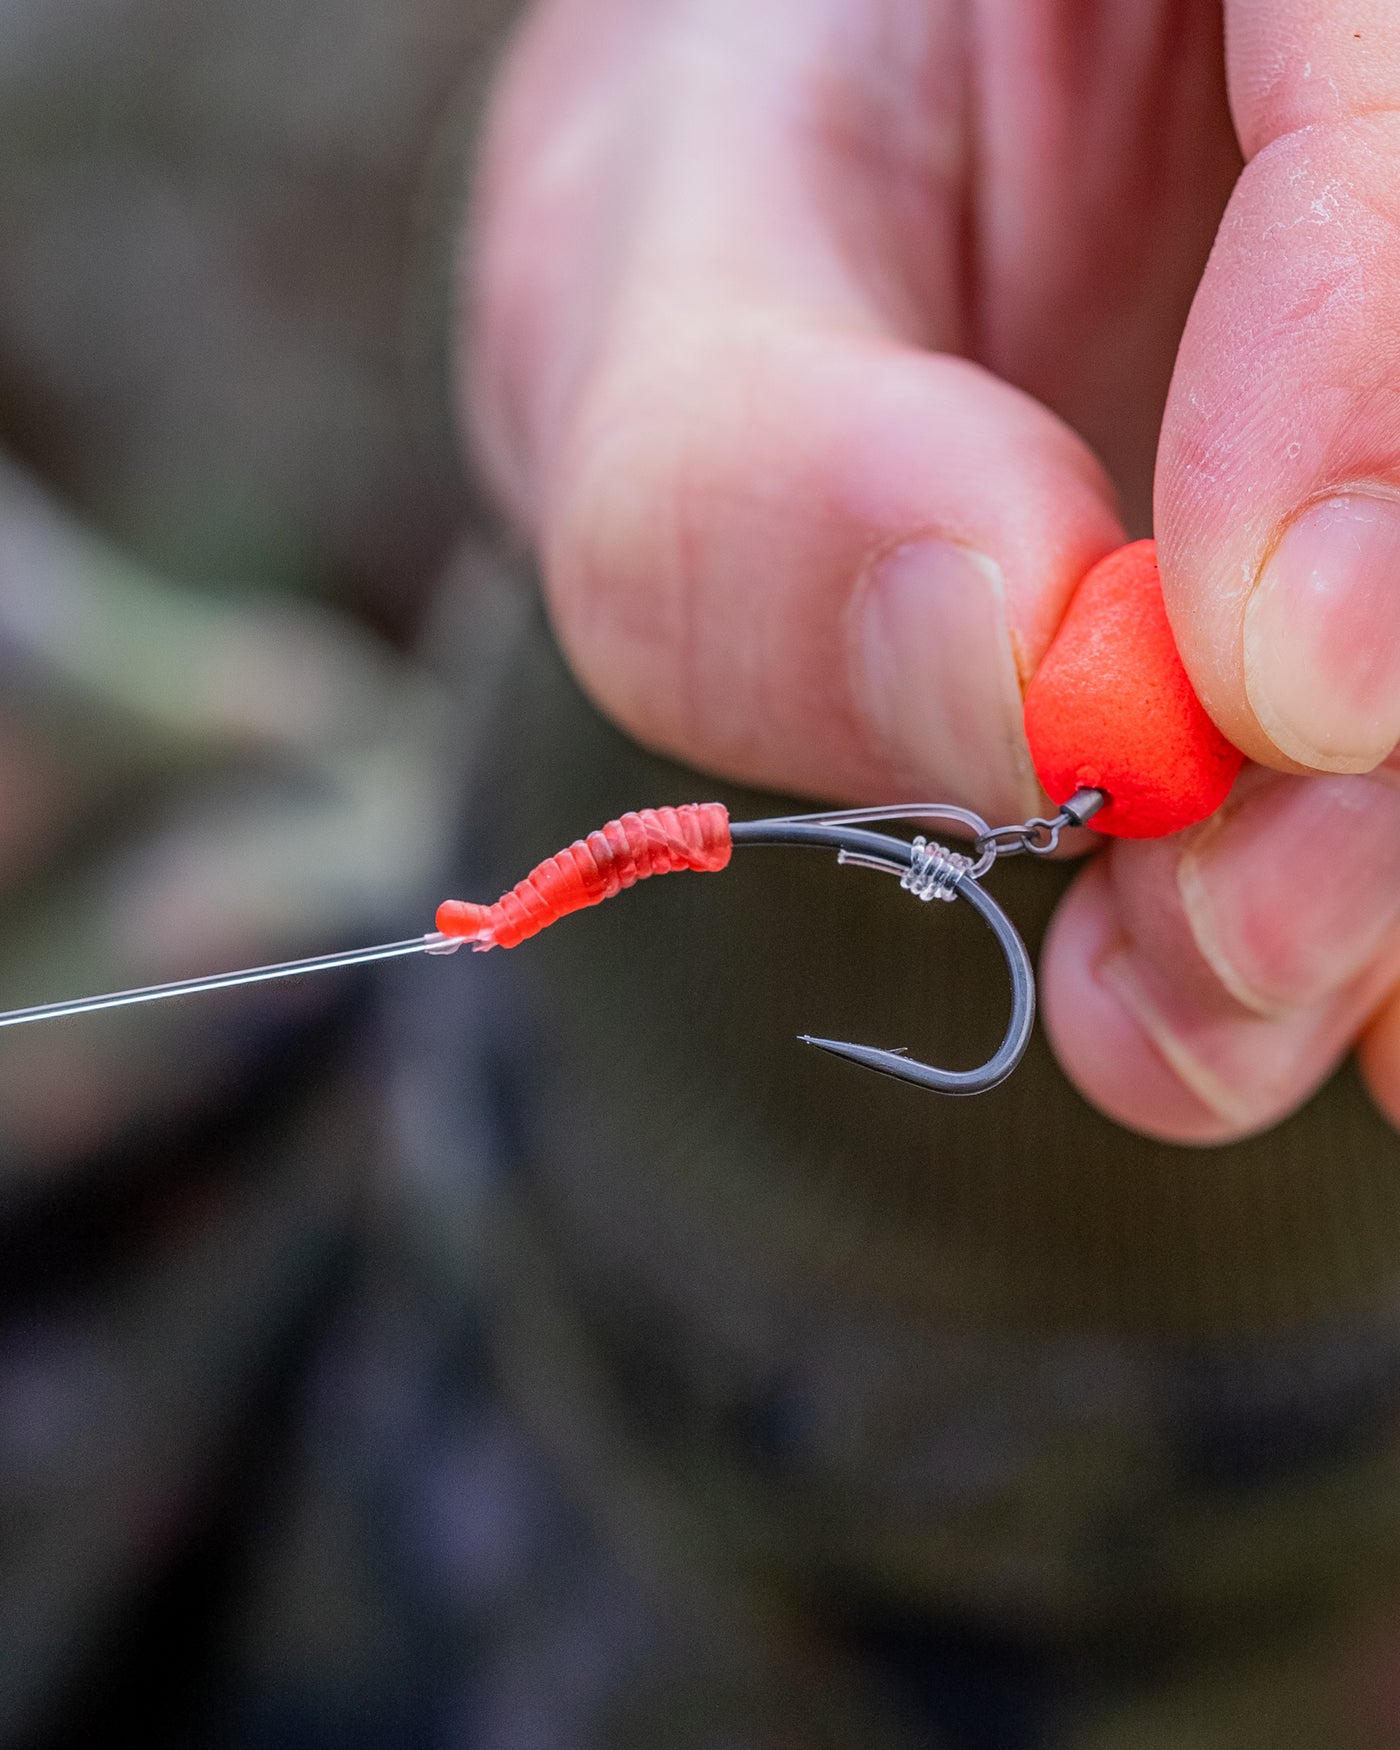 Meta Terminal Tackle All-In-1 Rig-Fuzed Leader Leadclip D-Rig